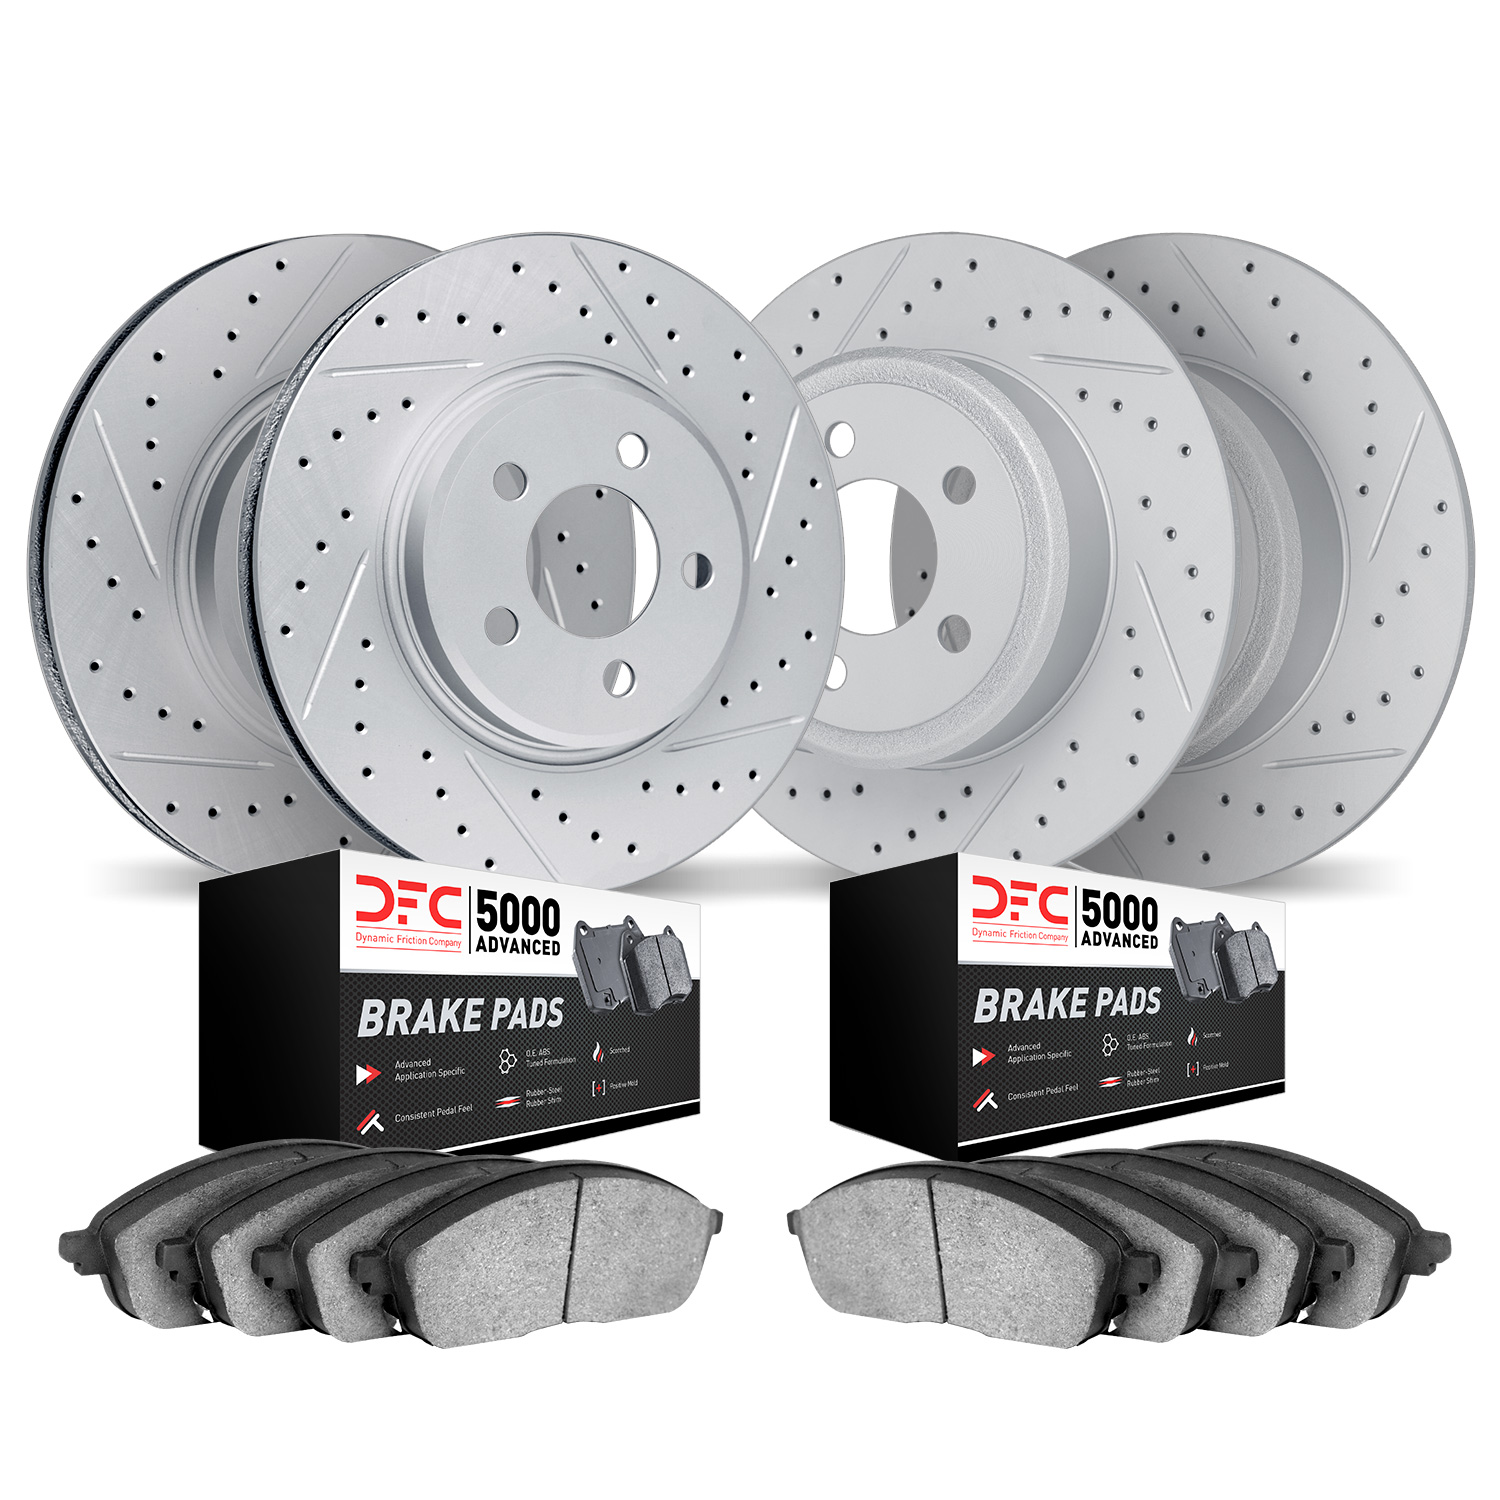 2504-67060 Geoperformance Drilled/Slotted Rotors w/5000 Advanced Brake Pads Kit, 2013-2019 Infiniti/Nissan, Position: Front and